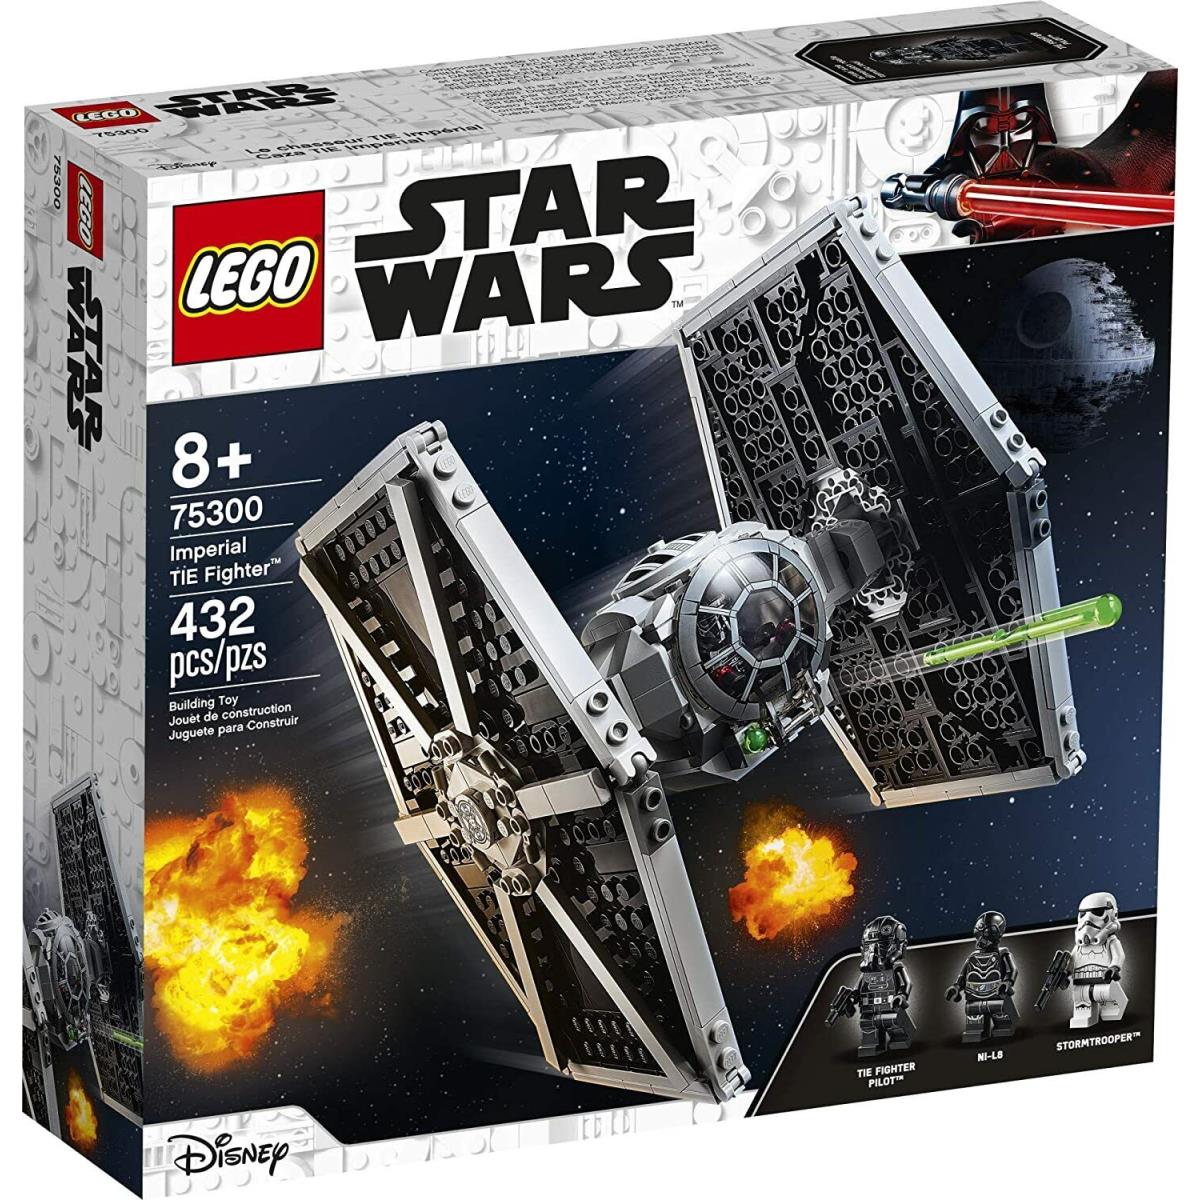 2021 Lego Star Wars Imperial Tie Fighter 75300 Building Kit 432 Pieces